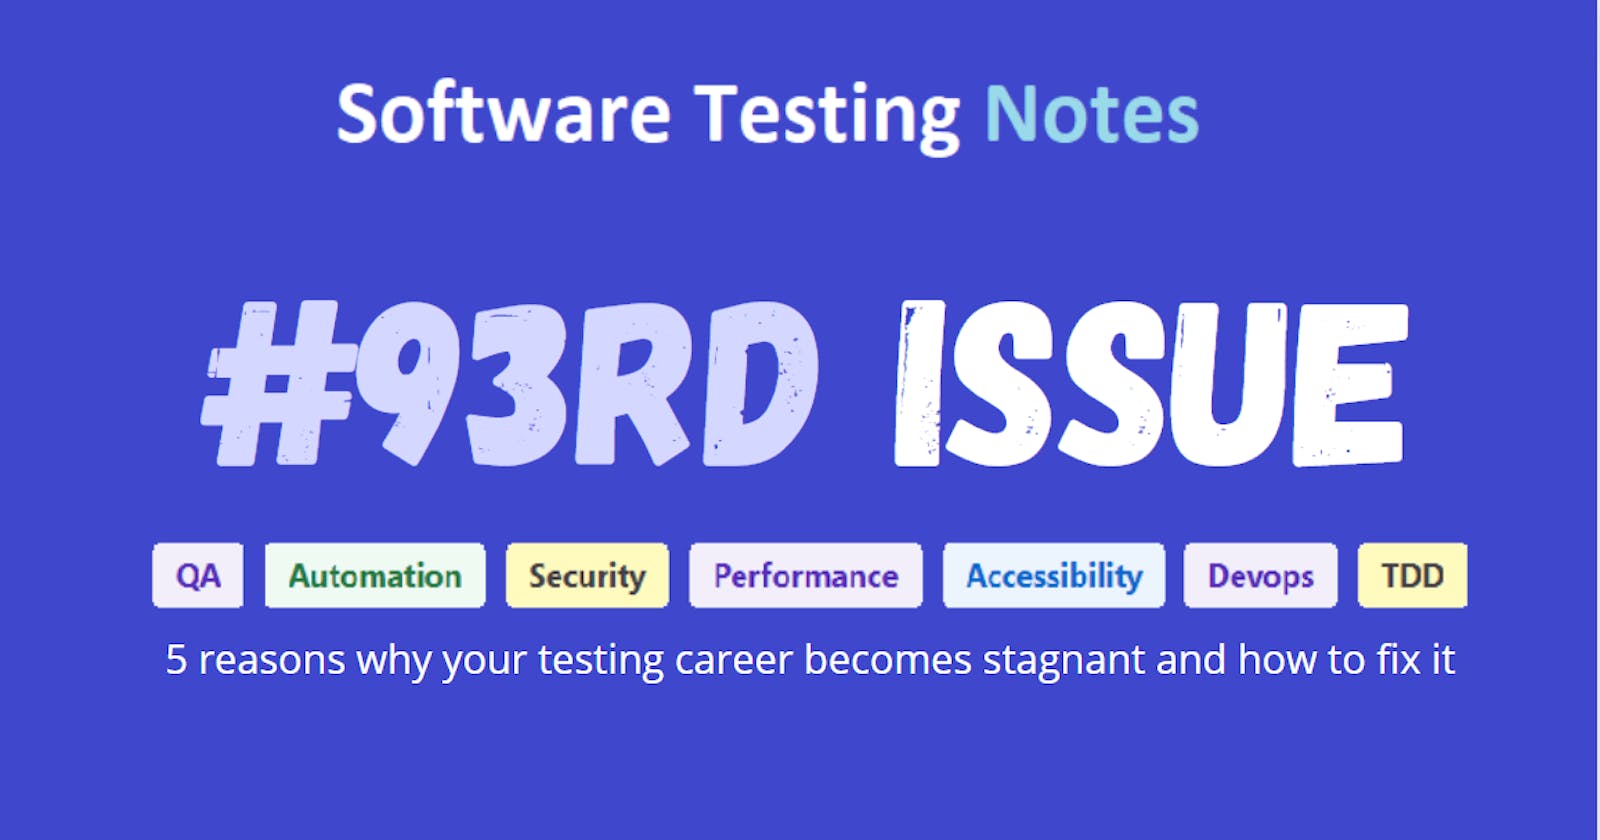 Issue #93 : Software Testing Notes